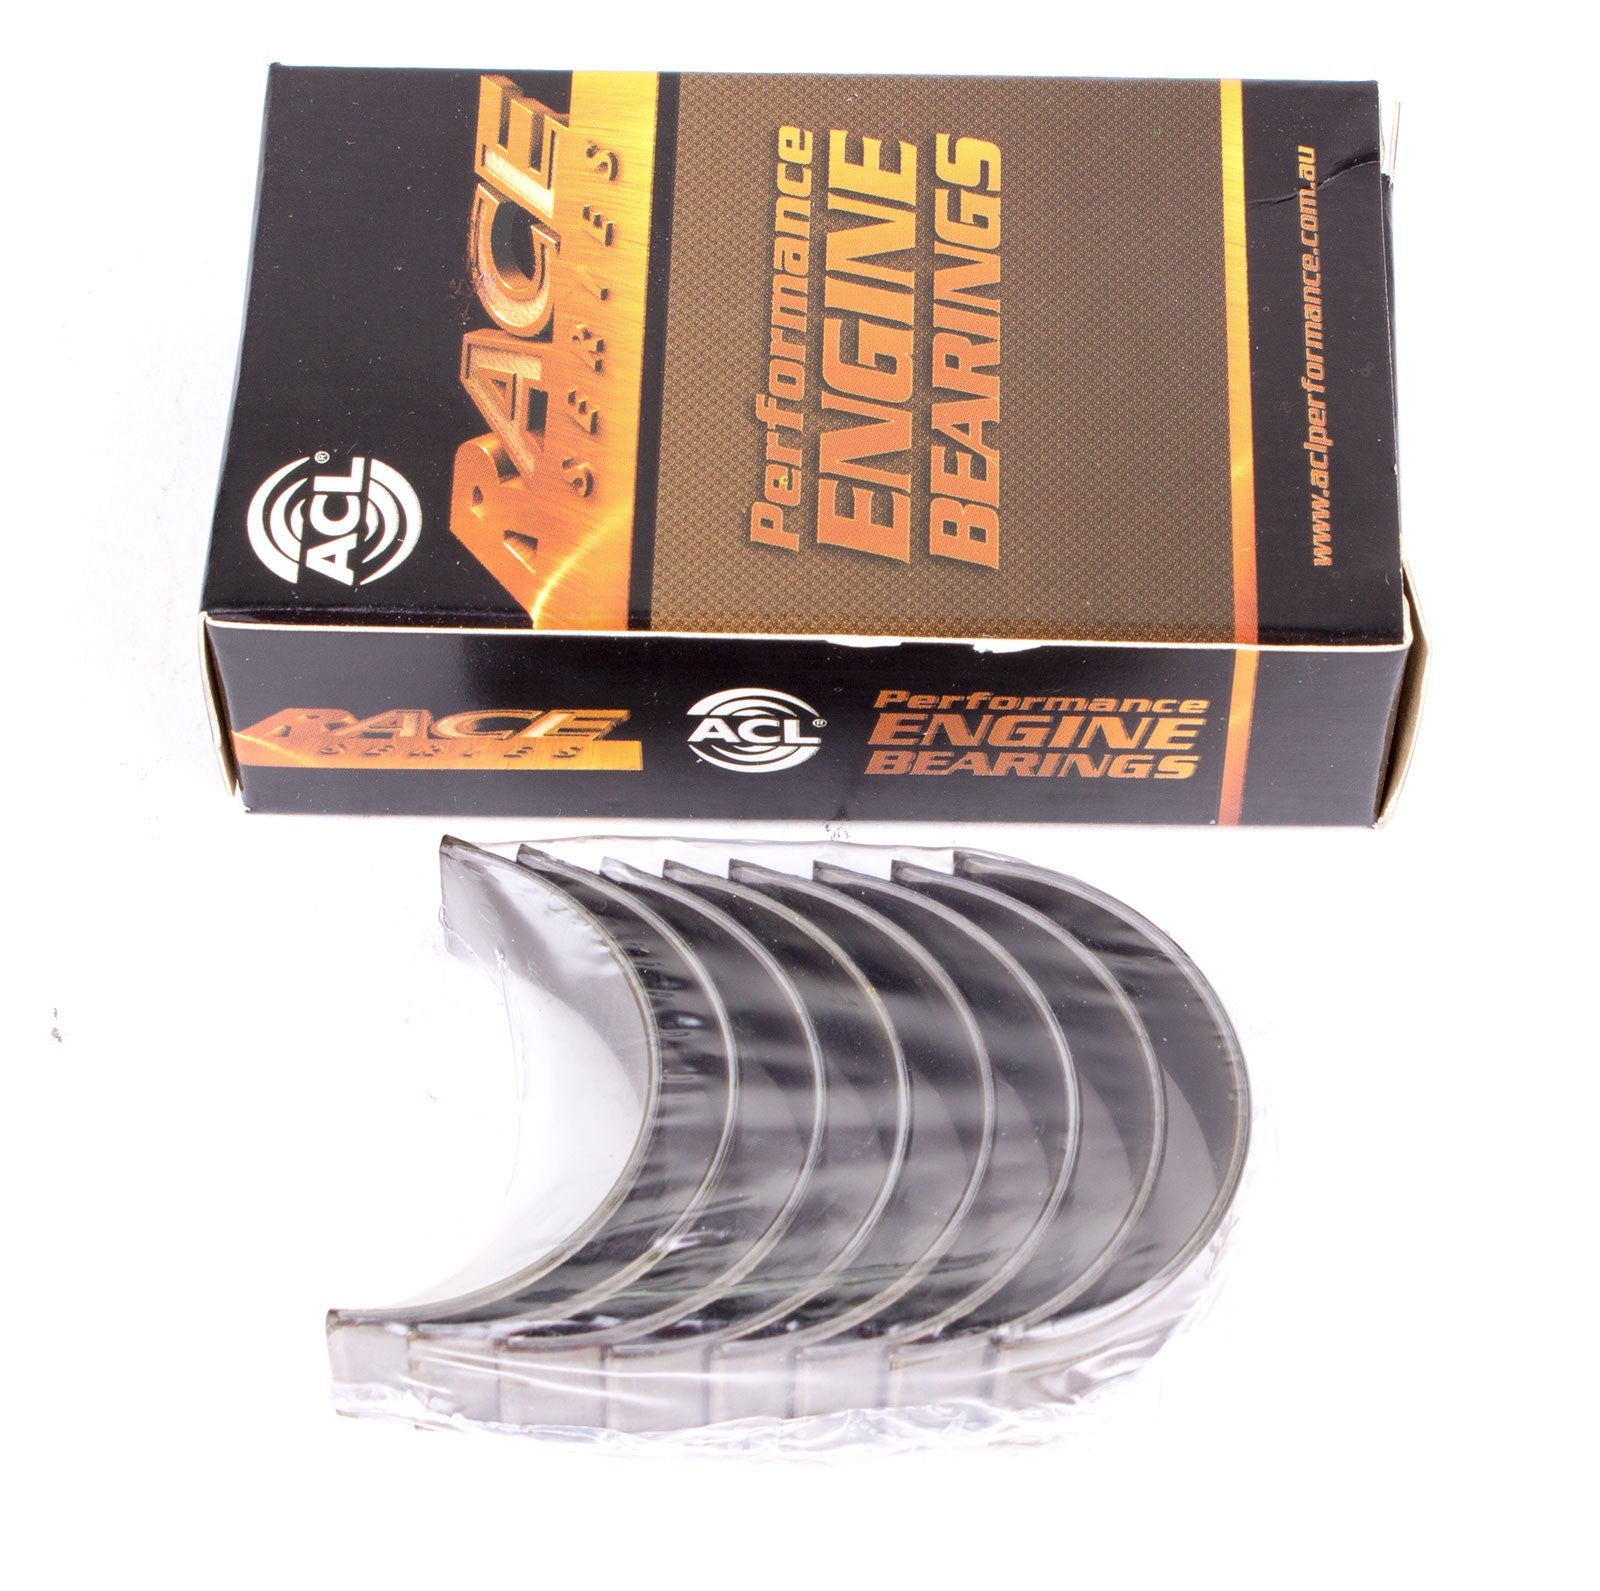 ACL 5M7819H-.025 Main bearing set (ACL Race Series) Photo-0 